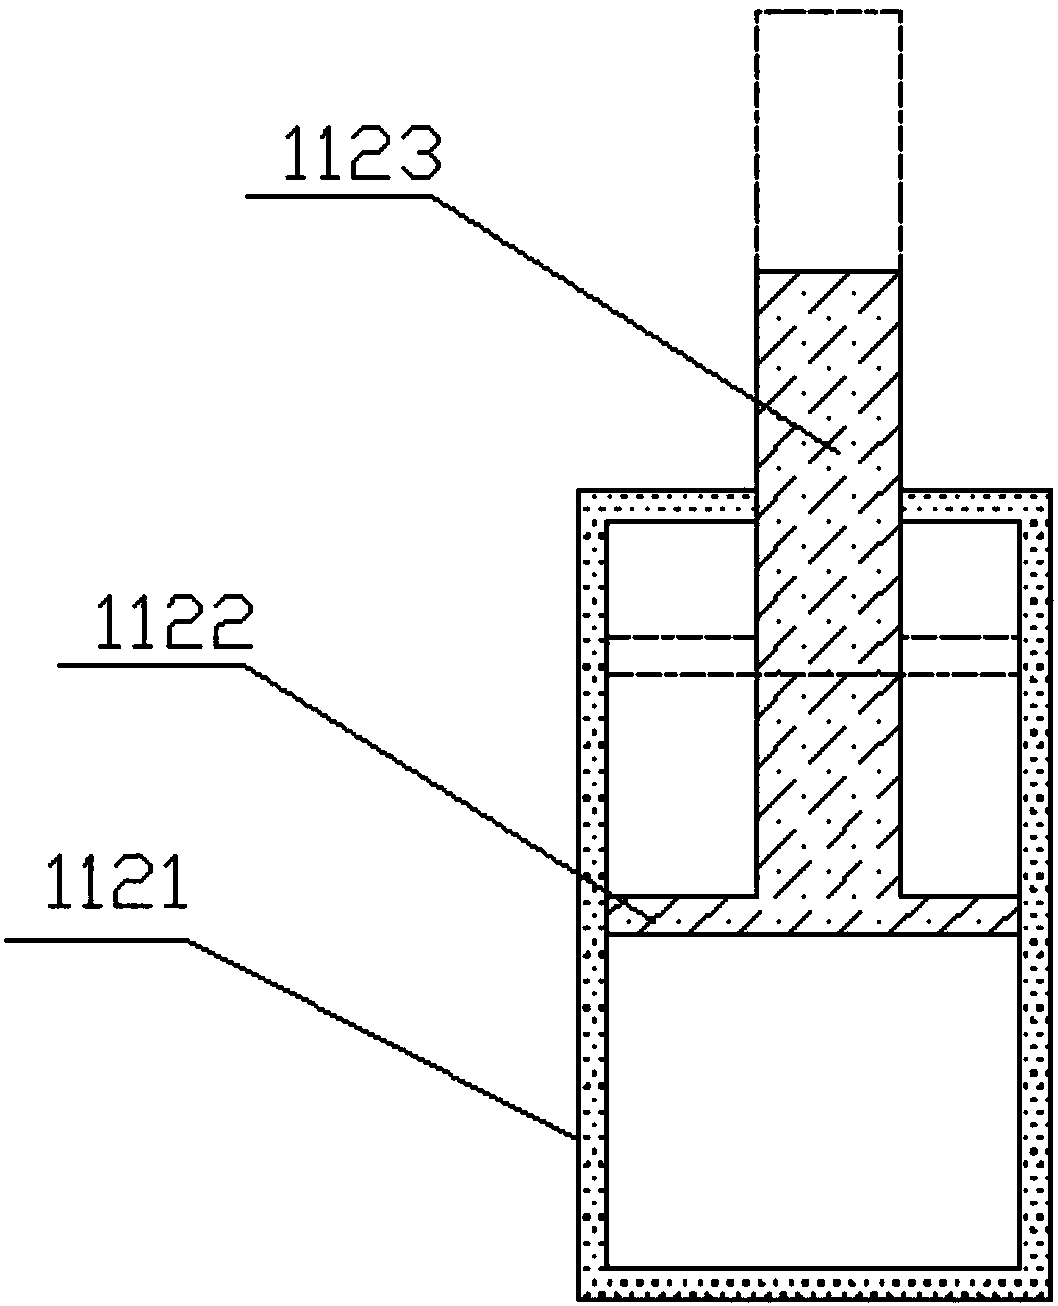 Unmanned aerial vehicle recovery device and method based on hydraulic lifting and mechanical hand locking structure